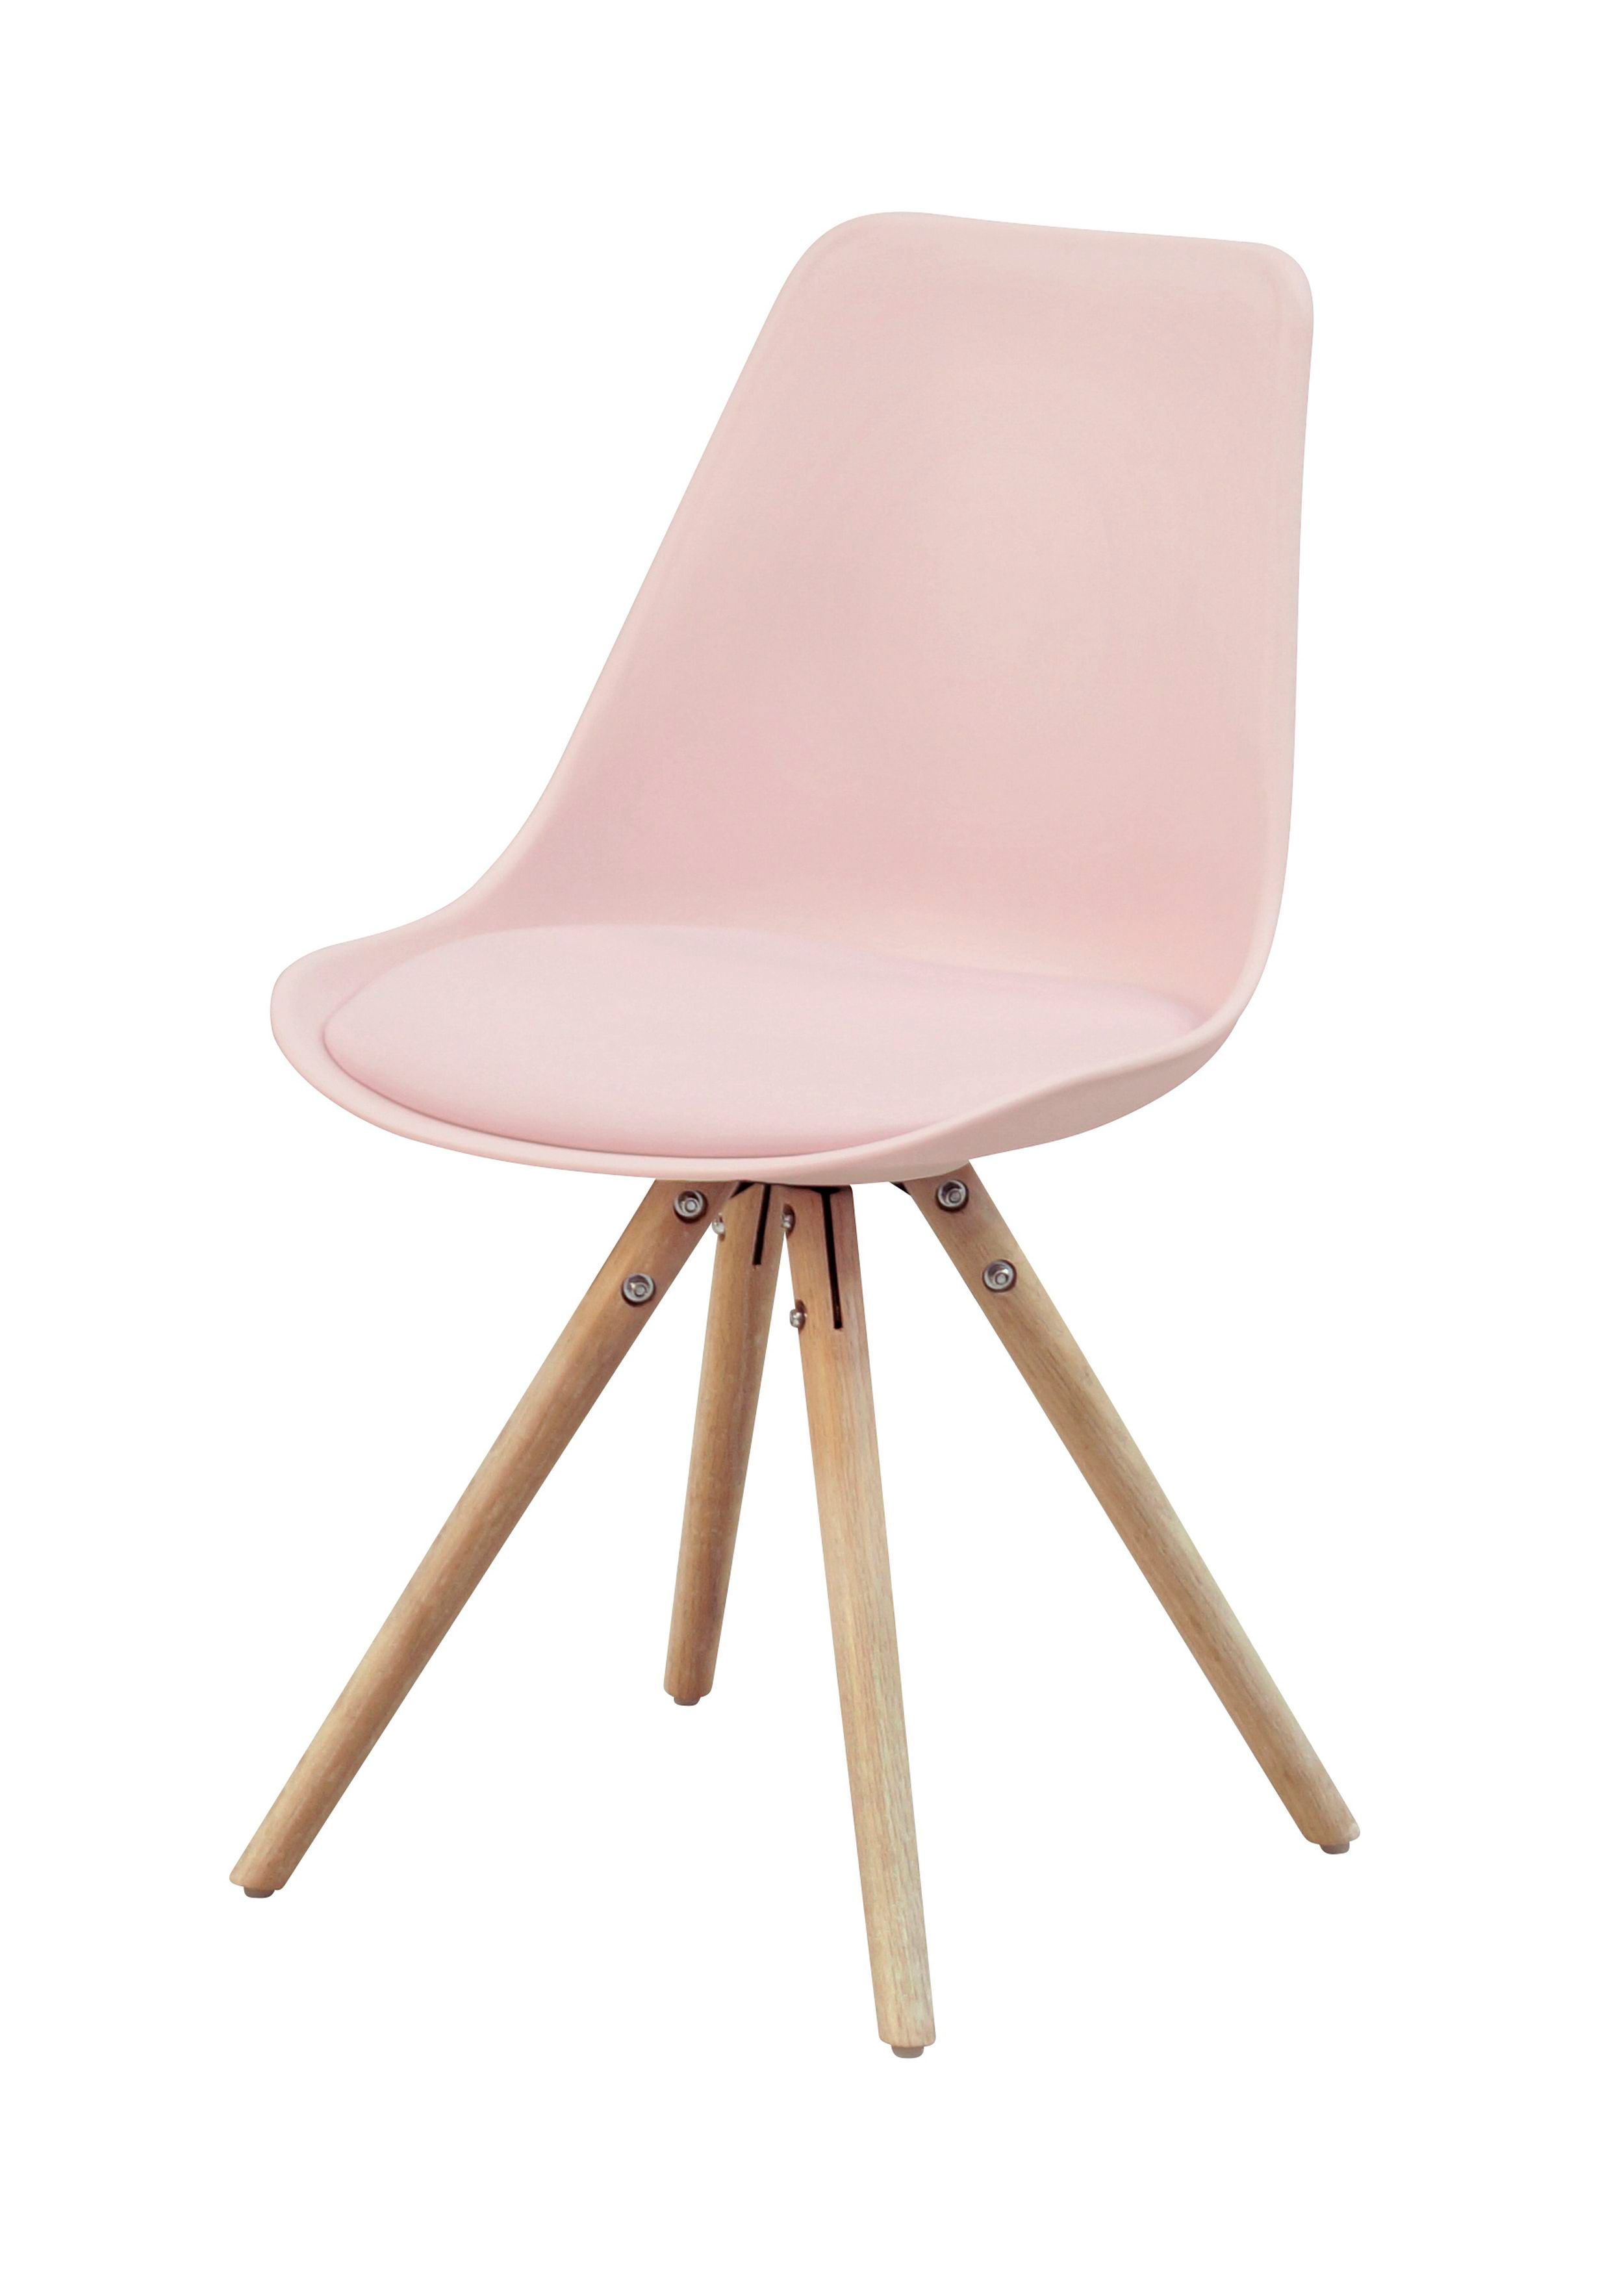 Chaise rose scandinave